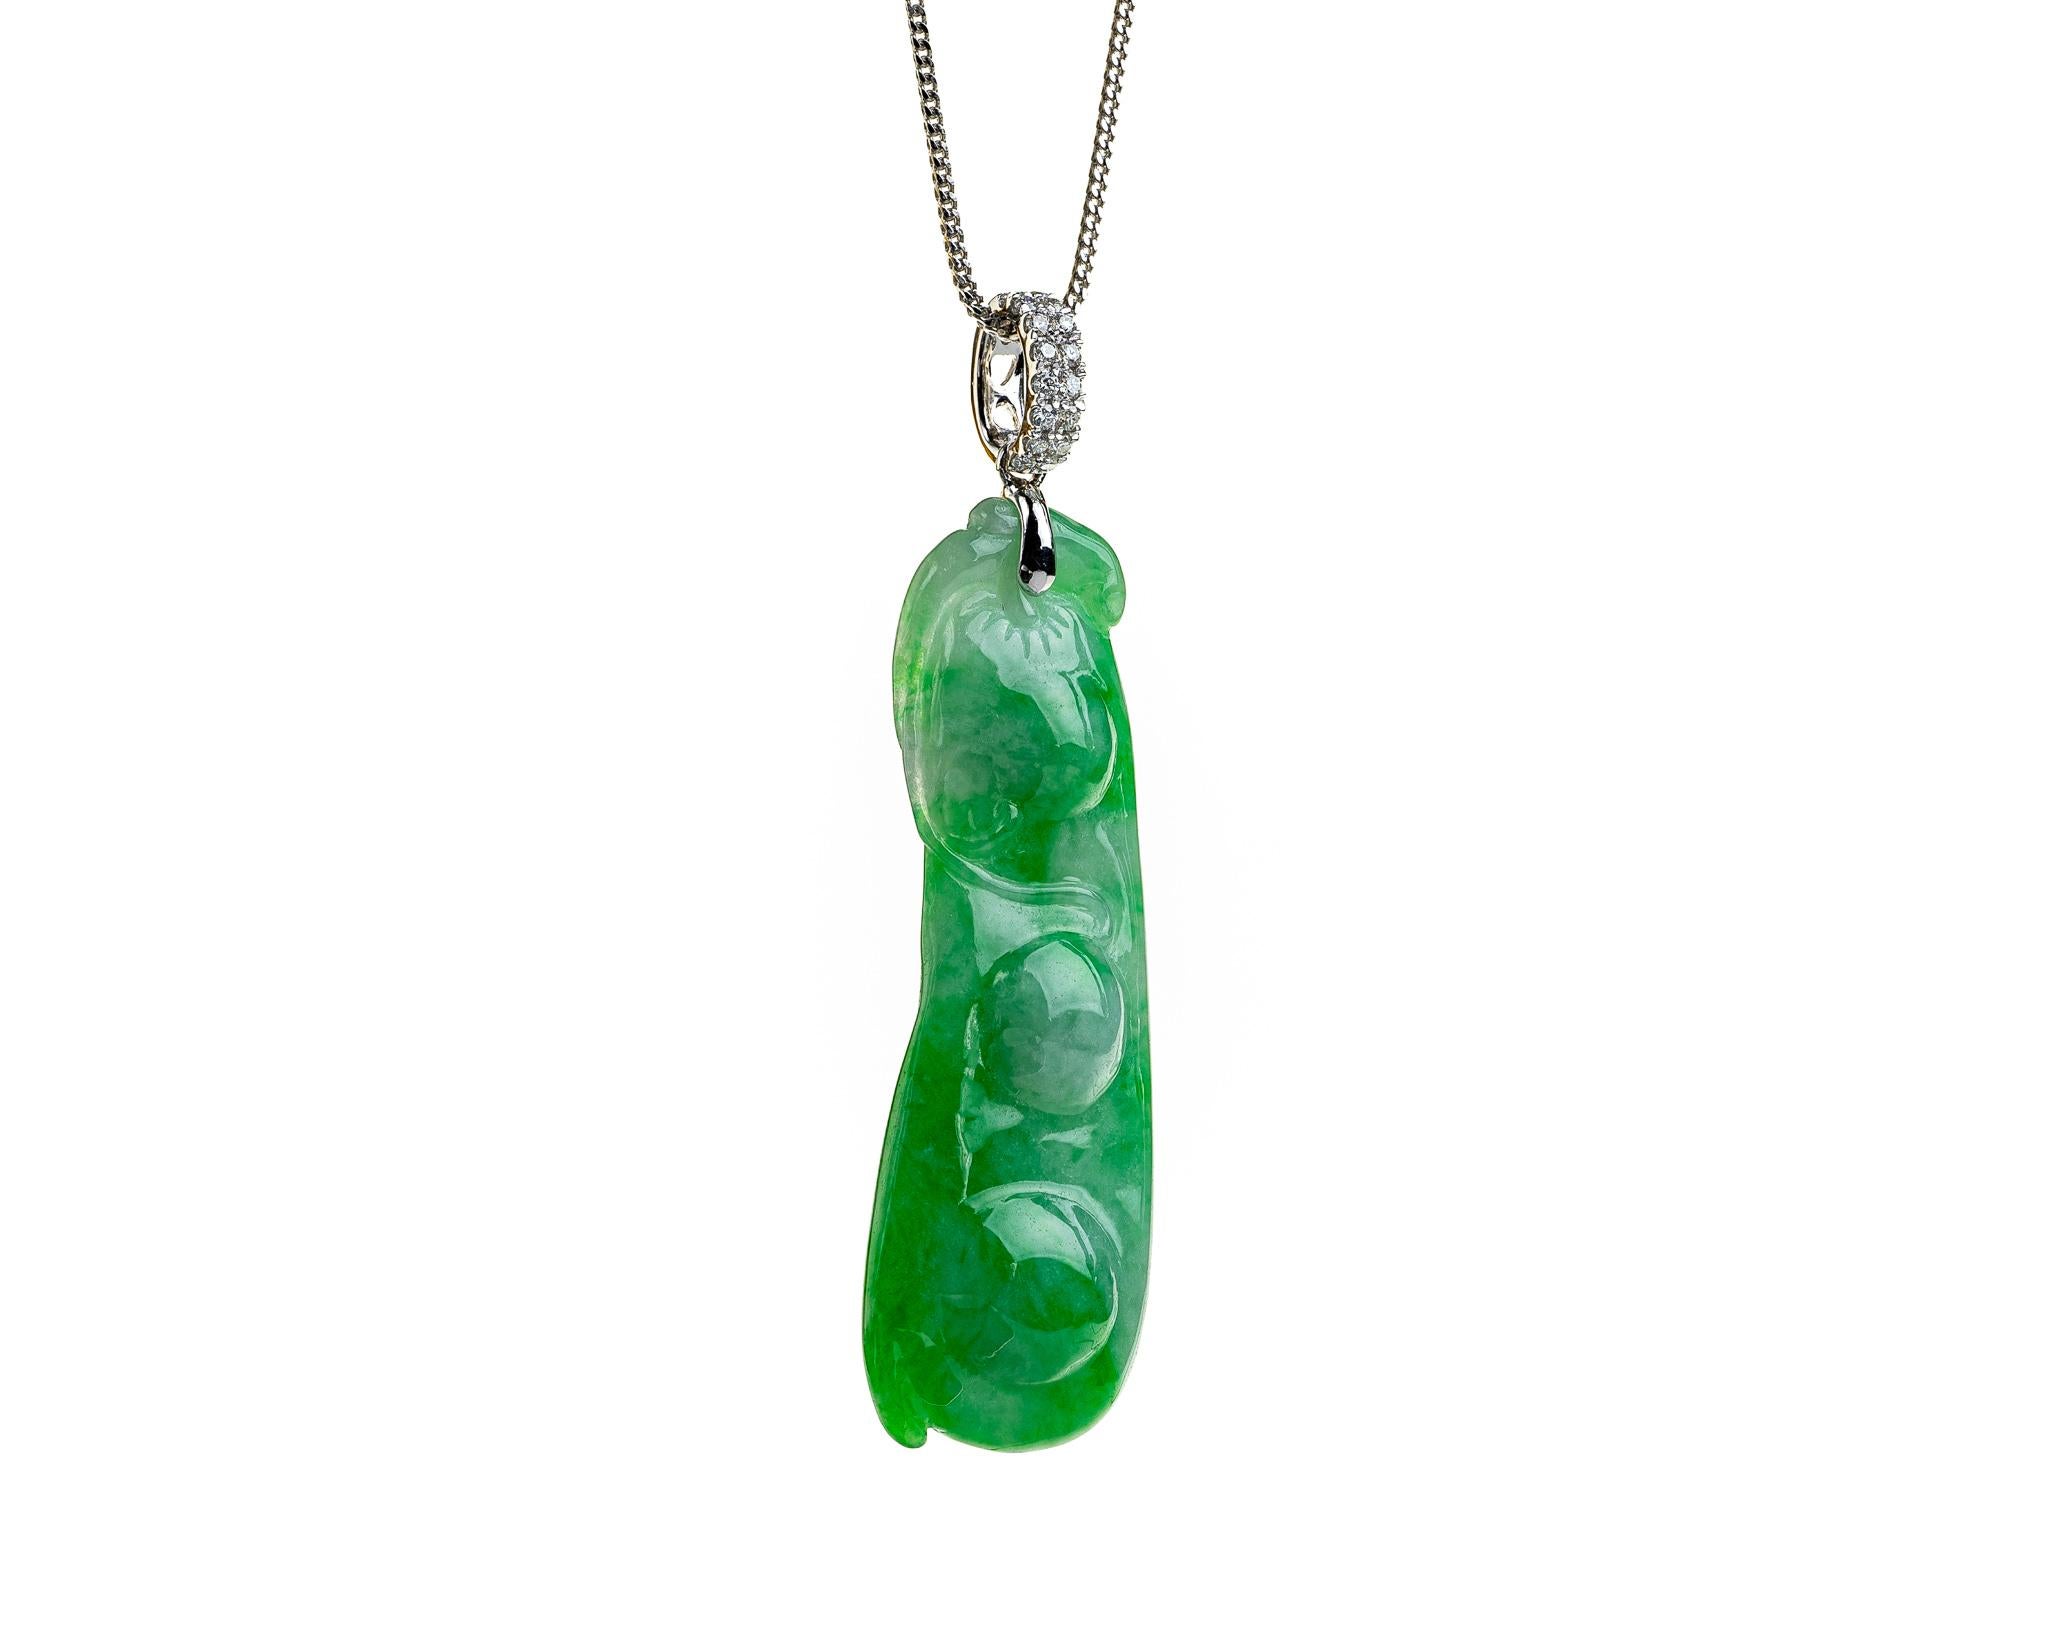 This is an all natural, untreated jadeite jade carved peapod pendant set on an 18K white gold and diamond bail.  The carved peapod represents happiness, prosperity and longevity. 

It measures 0.60 inches (15.4mm) x 1.87 inches (47.7mm) with